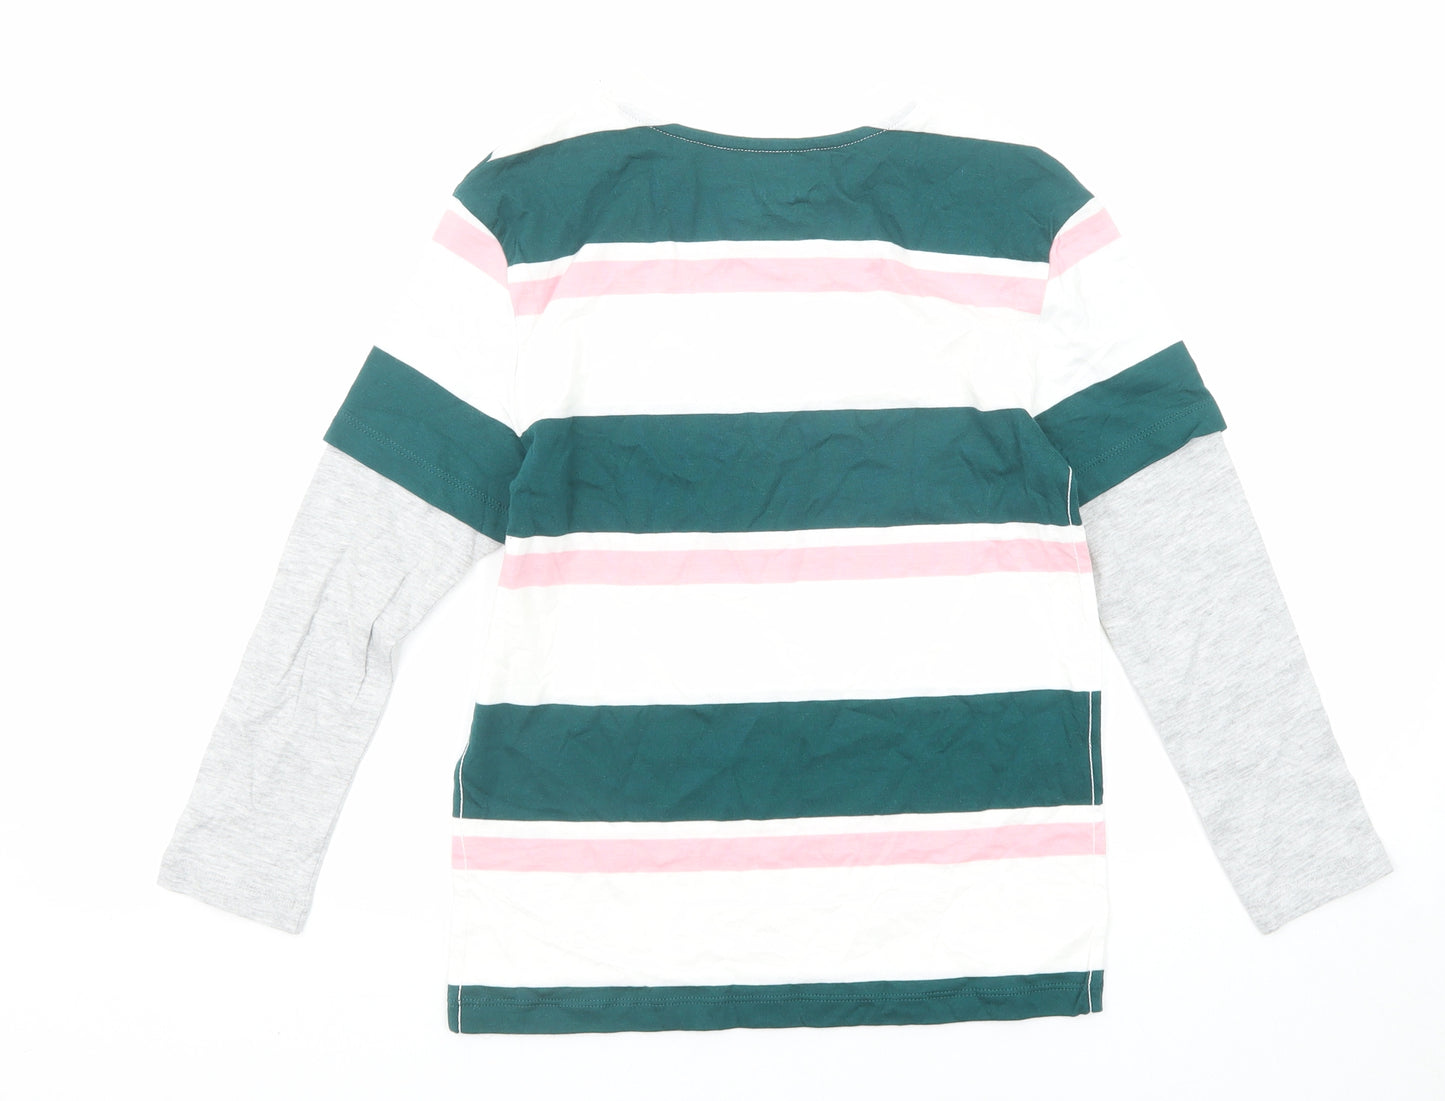 Marks and Spencer Boys Multicoloured Striped Cotton Basic T-Shirt Size 8-9 Years Round Neck Pullover - N.Y.C